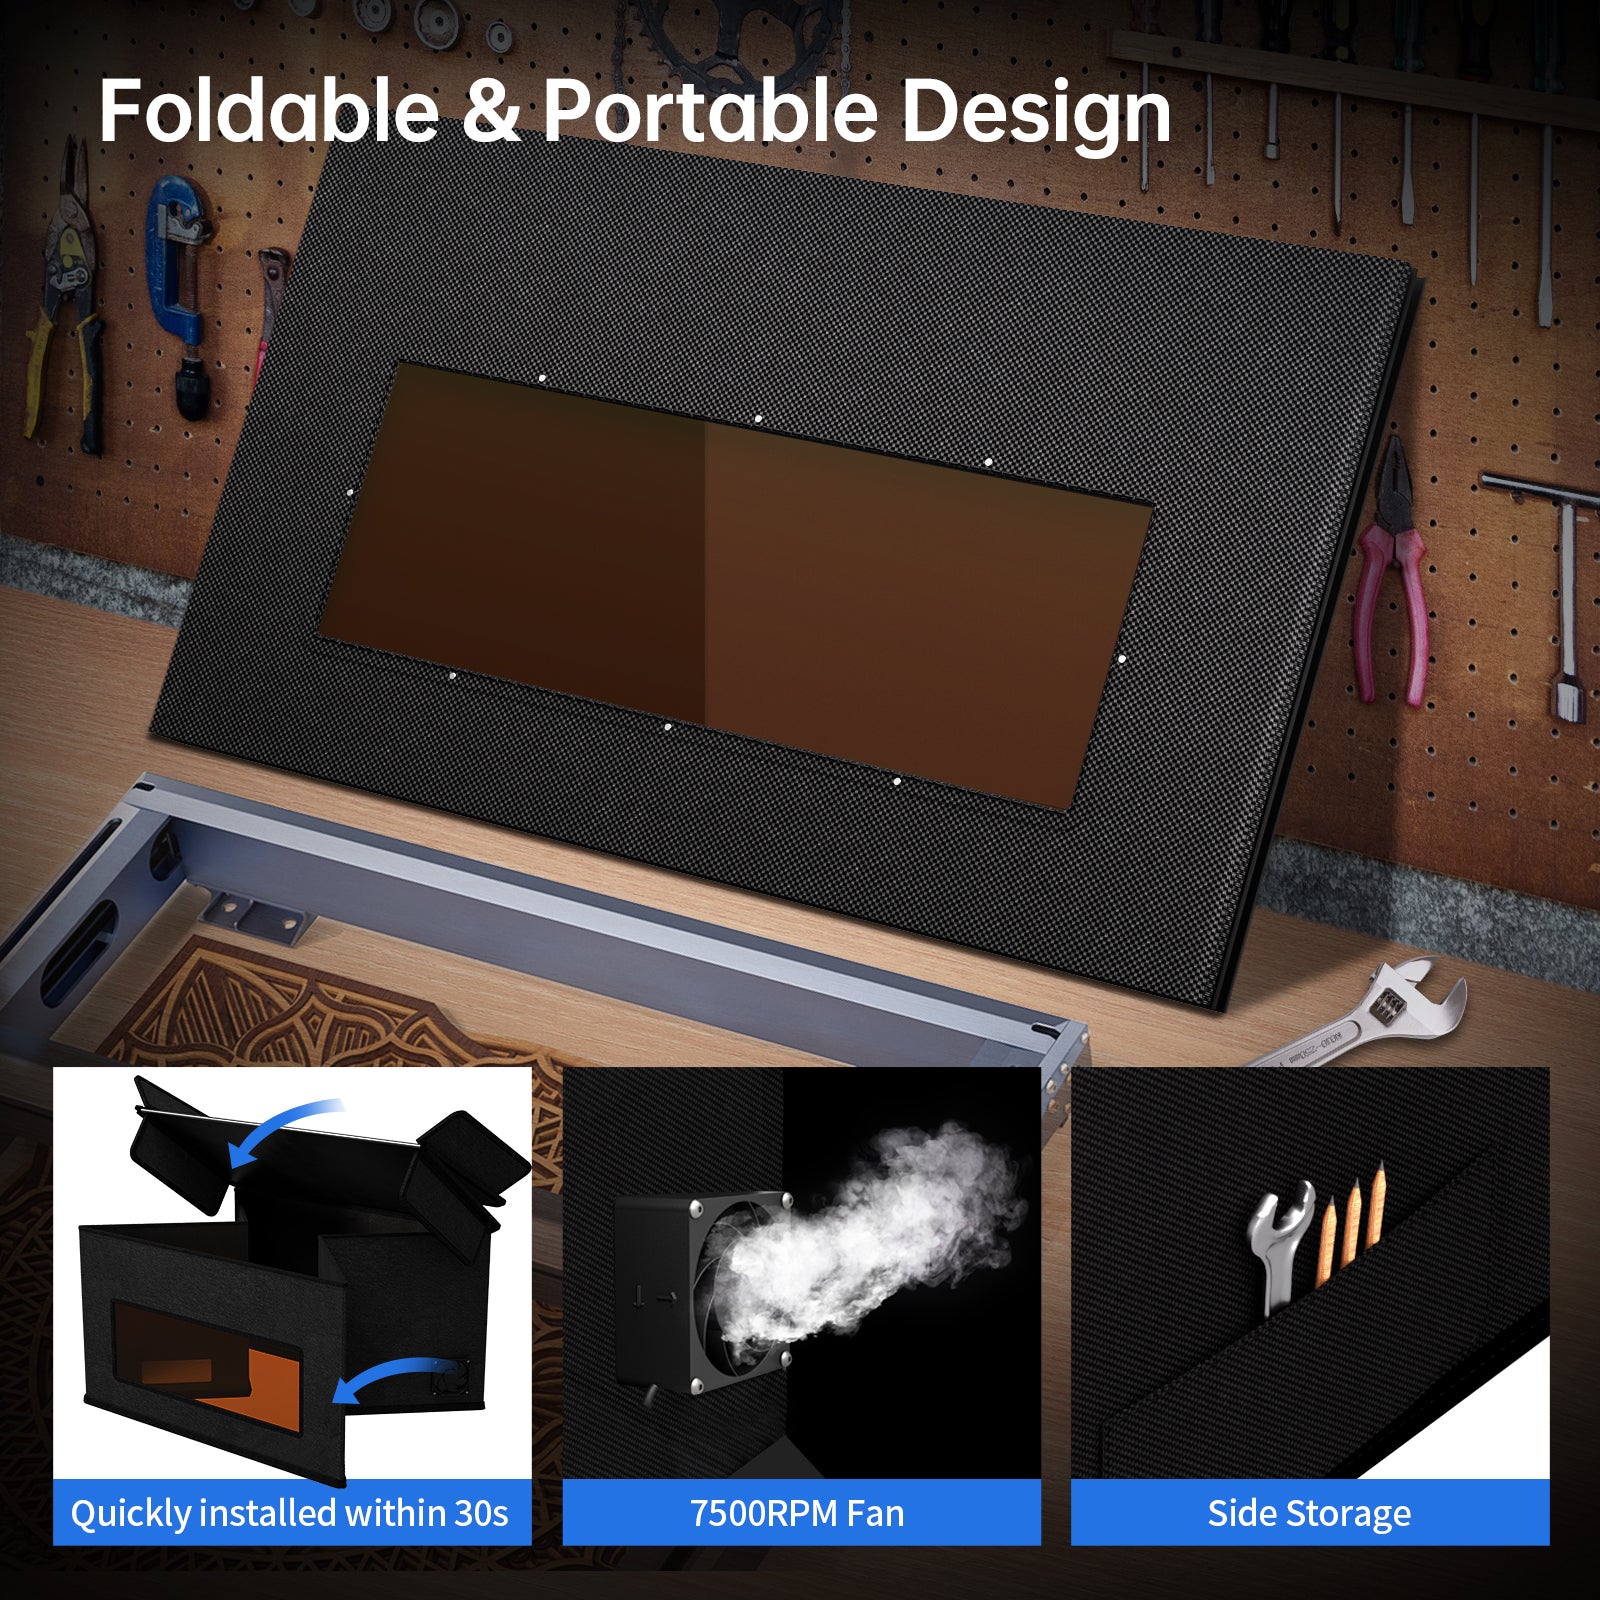 iKier E1 Enclosure Foldable Dust-Proof Cover for Laser Engraver